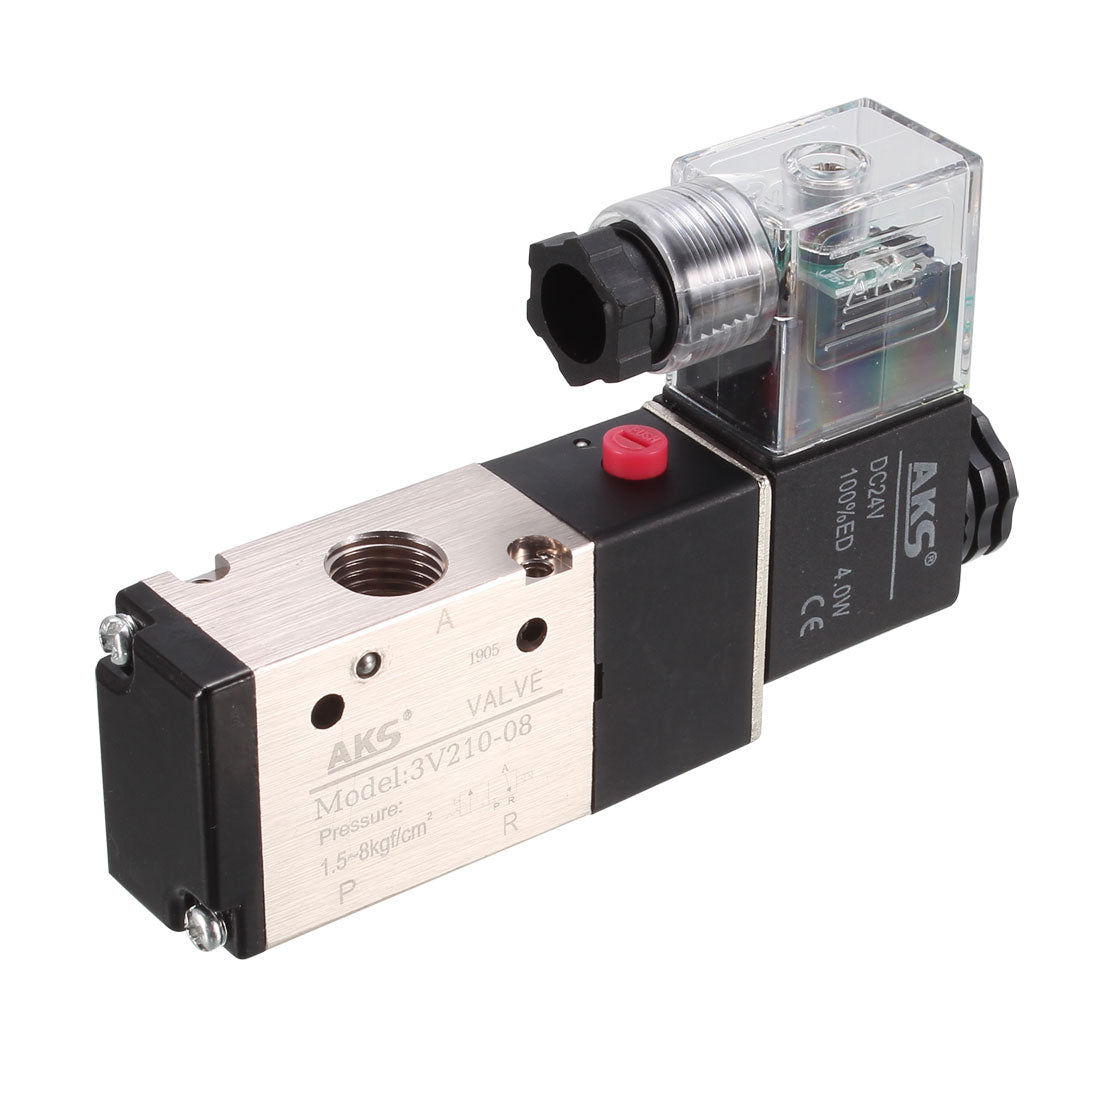 uxcell Uxcell 3V210-08 Pneumatic Air NC Single Electrical Control Solenoid Valve DC 24V 3 Way 2 Position 1/4" G  Thread Internally Piloted Acting Type